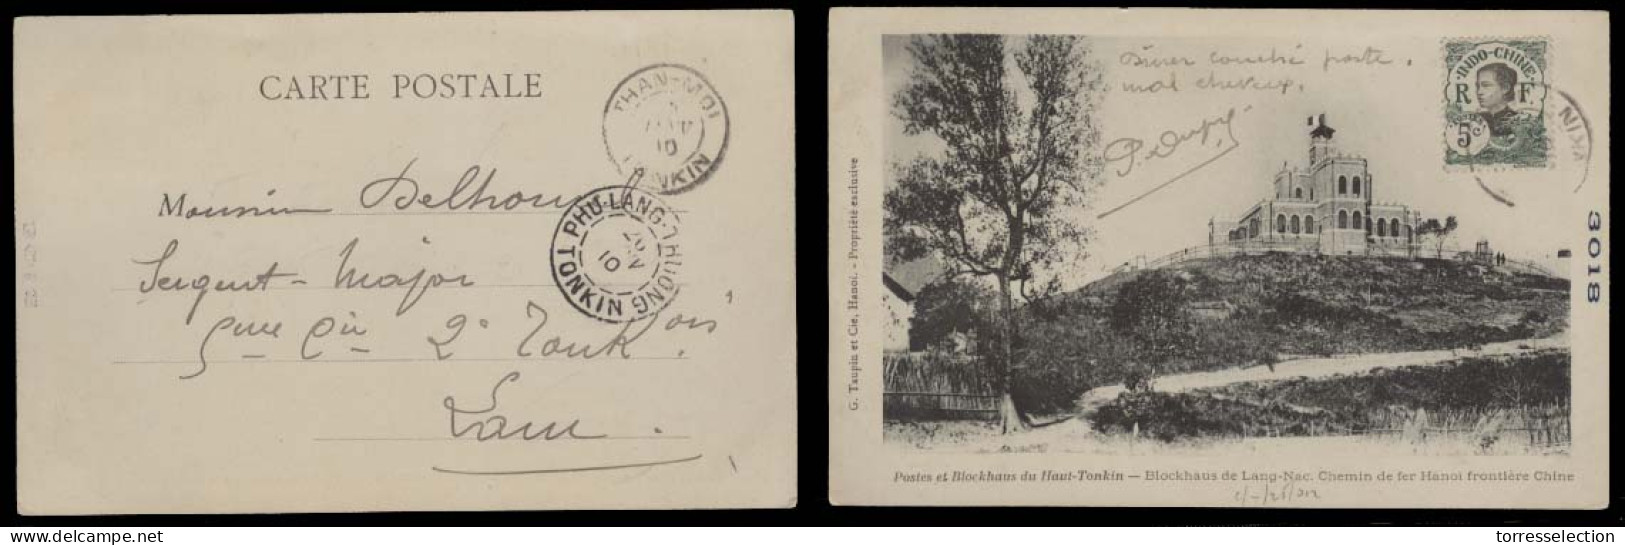 INDOCHINA. 1910. Than Moi - Phu Lang Thiong. Fkd Card Nice Towns Military Usage. - Autres - Asie